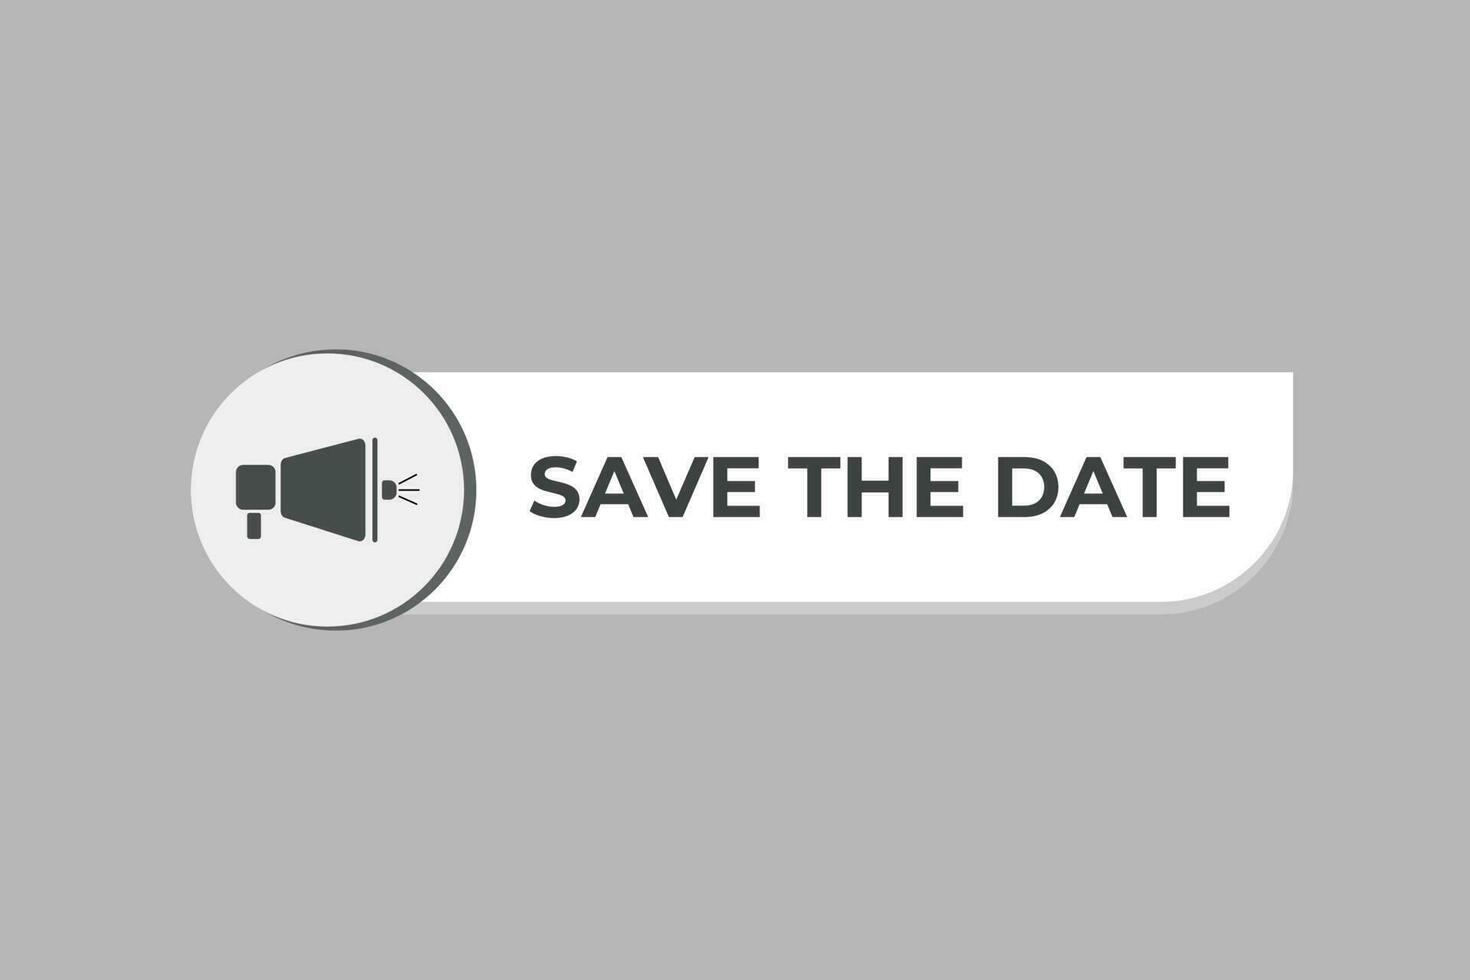 Save the Date Button. Speech Bubble, Banner Label Save the Date vector